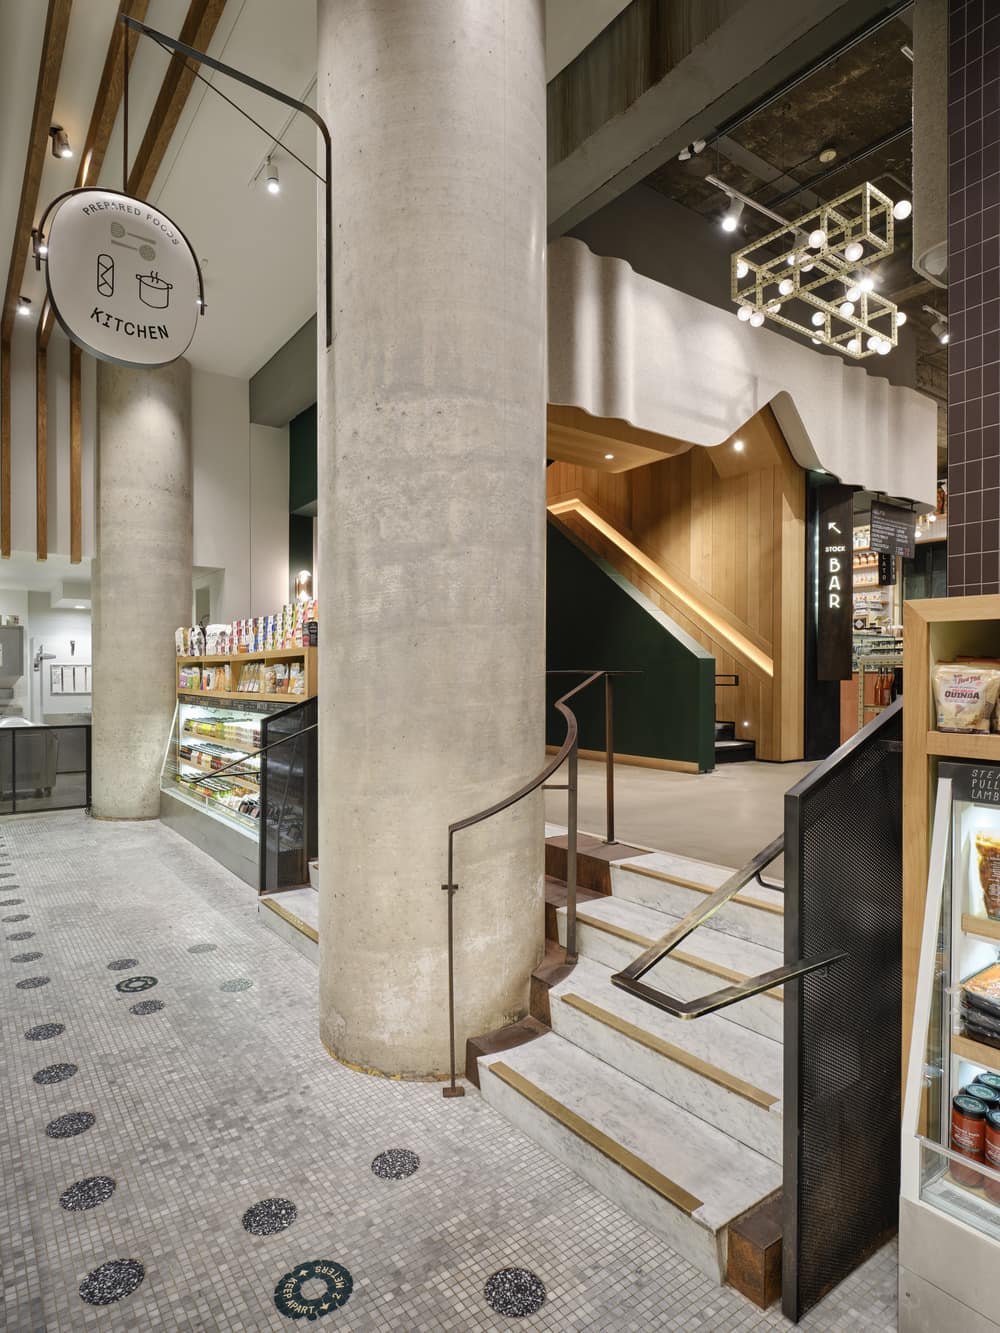 Stock T.C Transforms a Heritage Postal Station Into an Original Gastronomic Experience